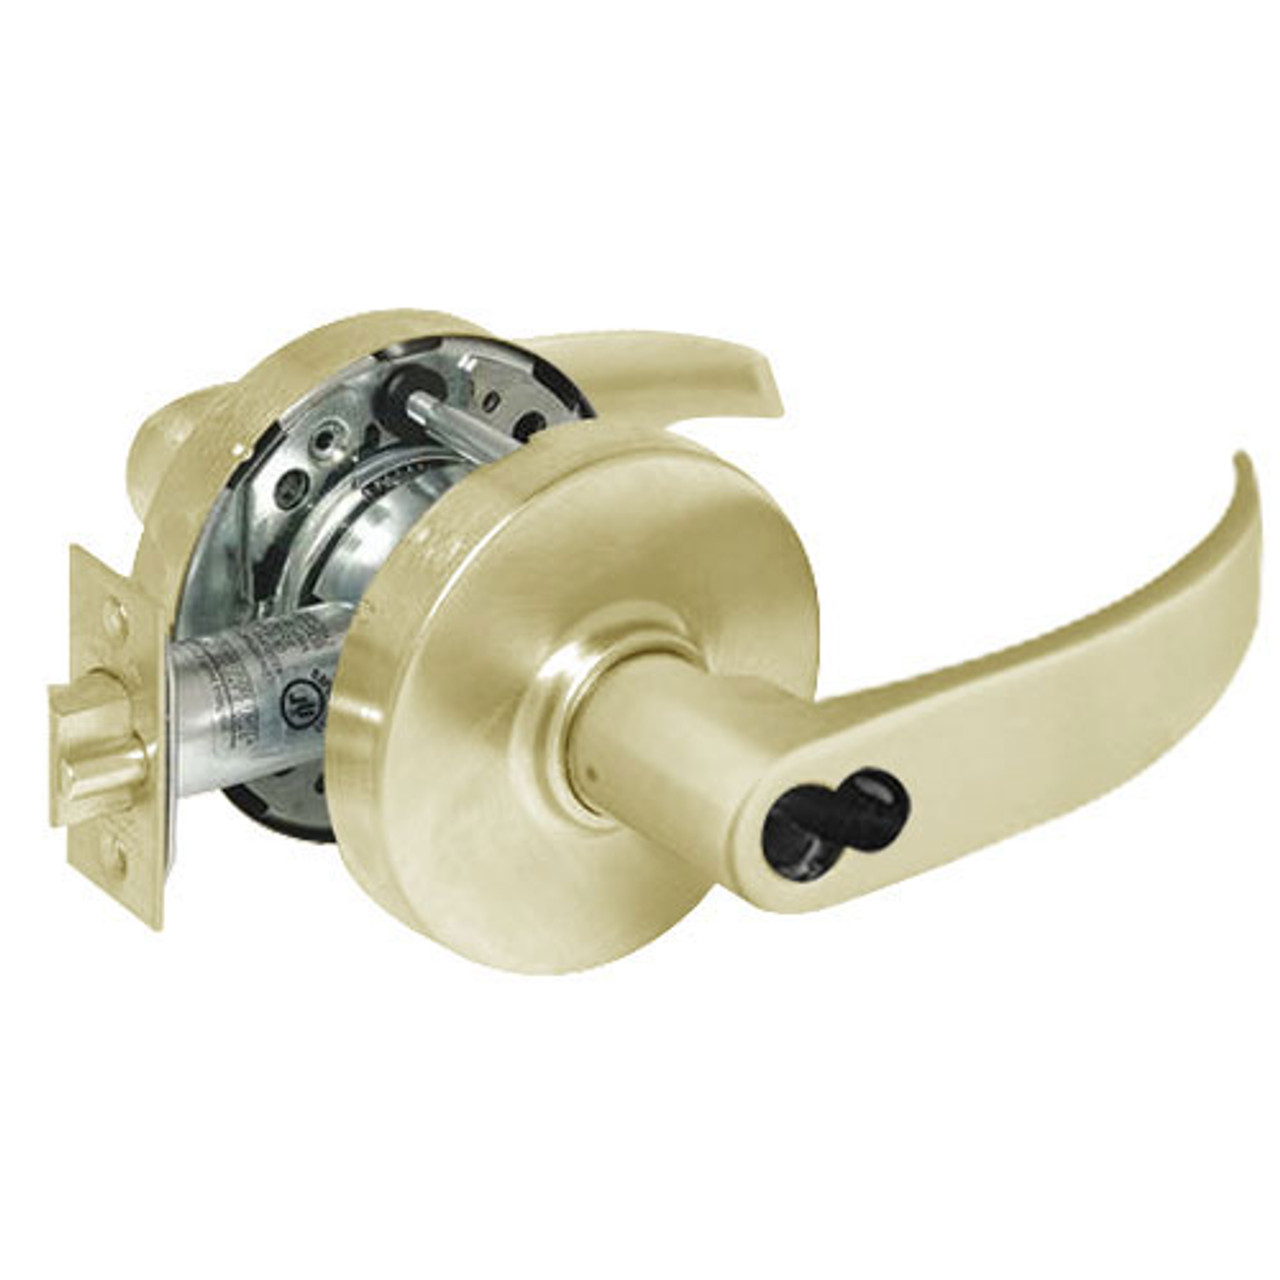 2870-10G26-LP-04 Sargent 10 Line Cylindrical Storeroom Locks with P Lever Design and L Rose Prepped for SFIC in Satin Brass